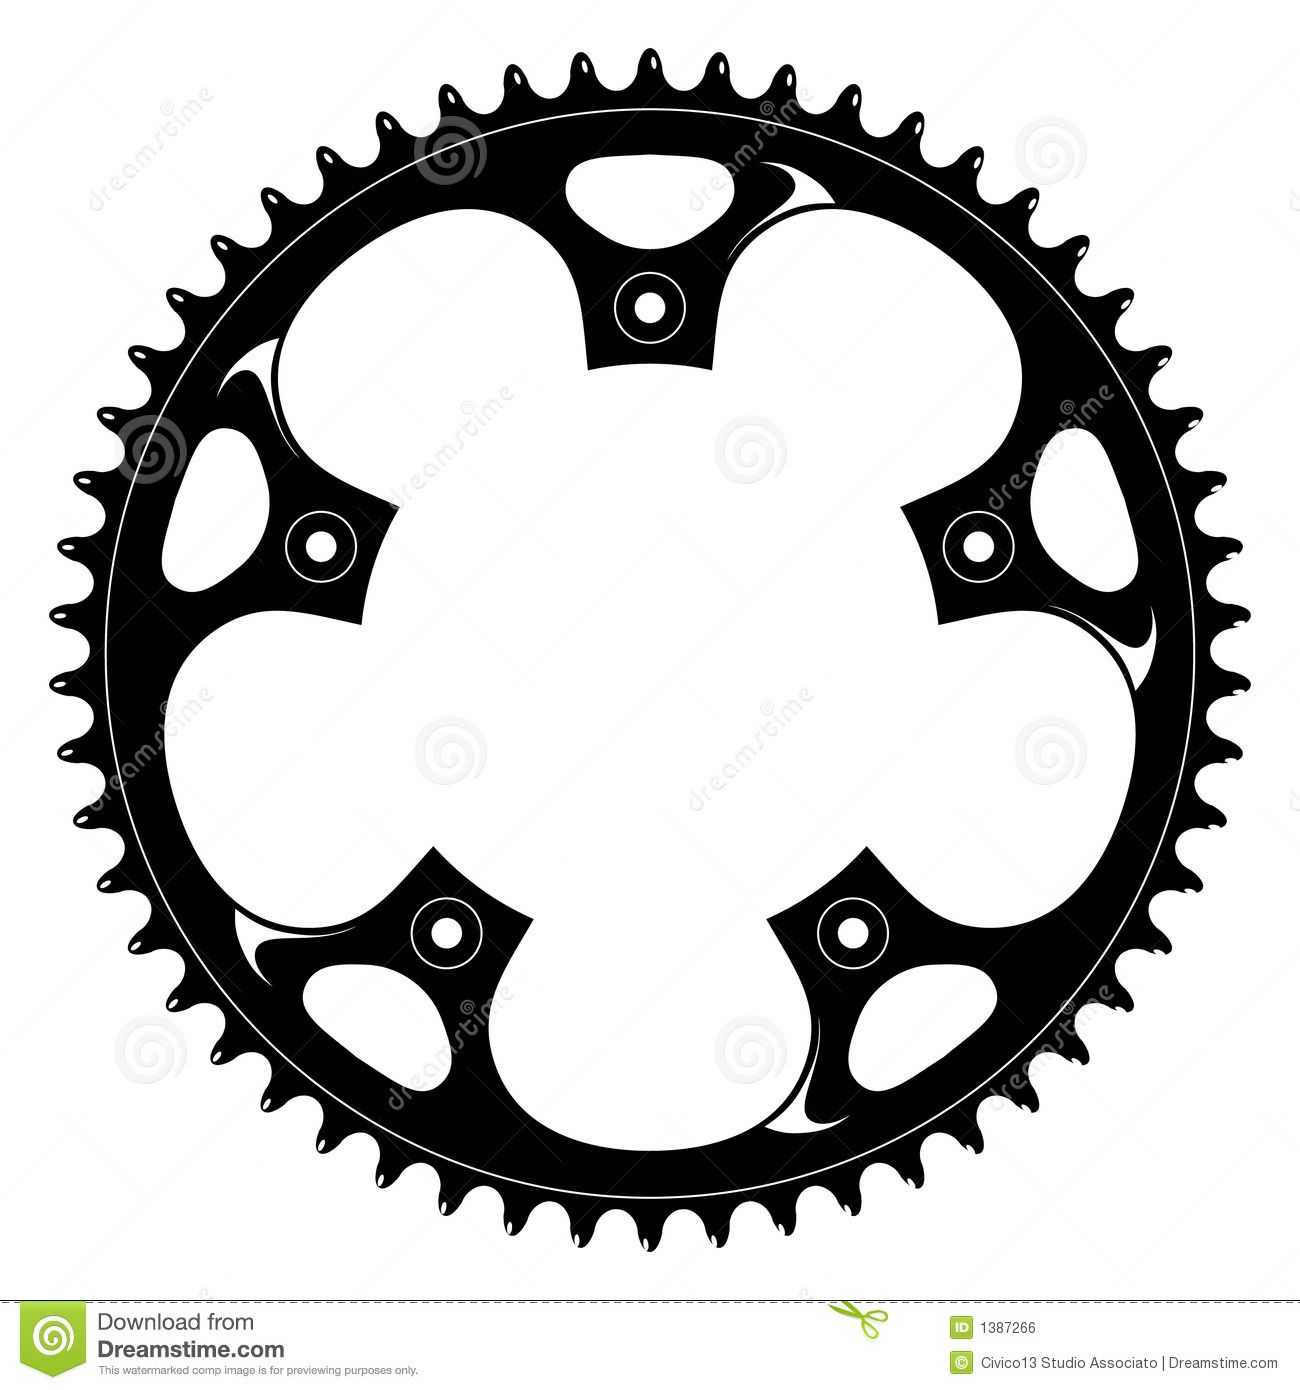 cycle clipart bicycle gear